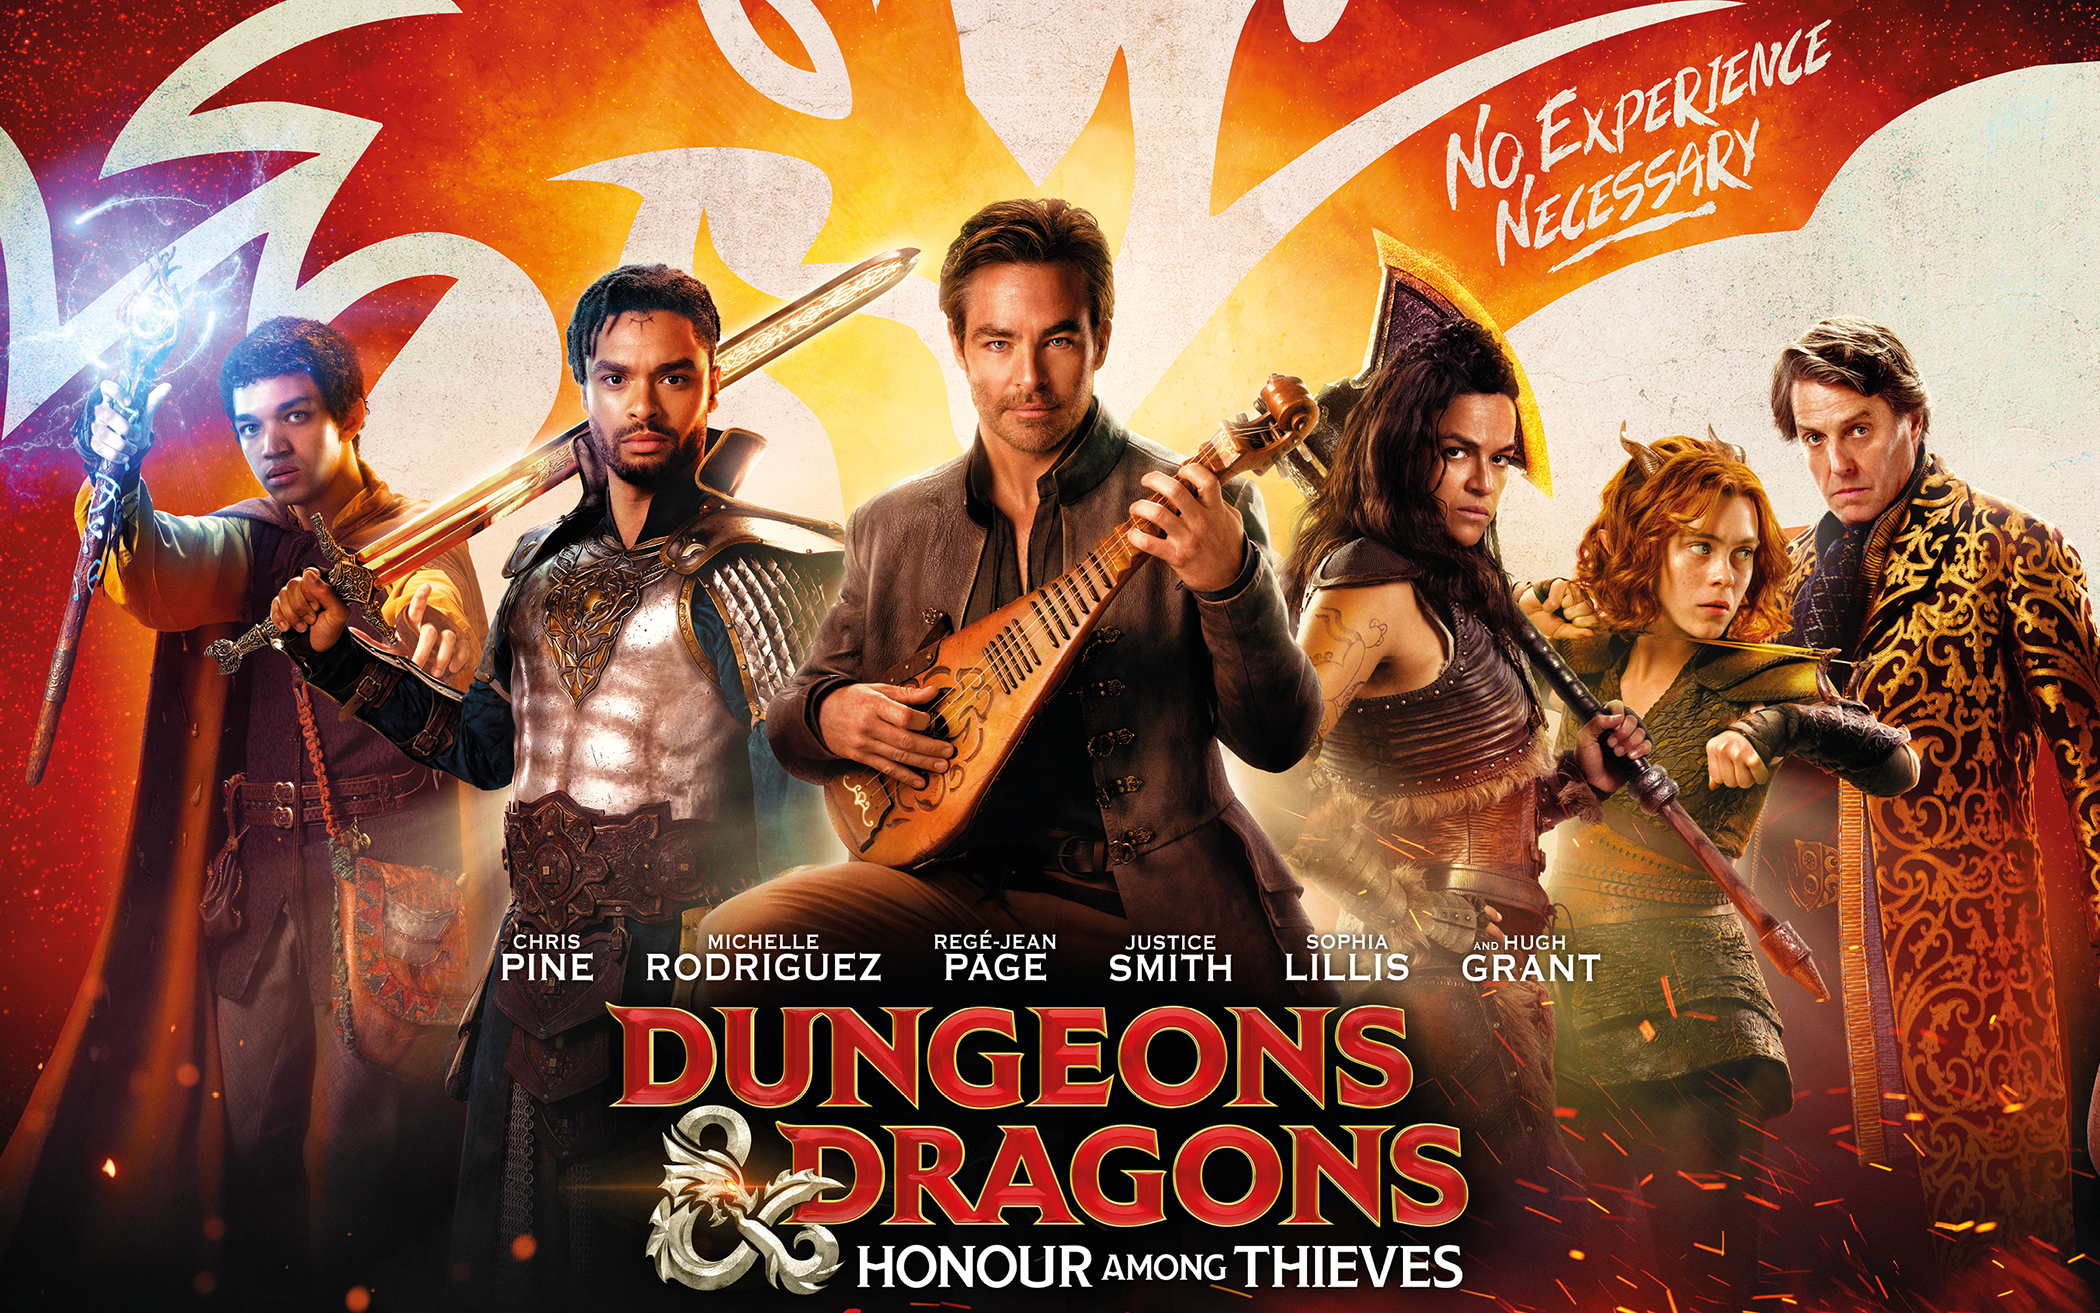 What Dungeons & Dragons: Honor Among Thieves gets right about